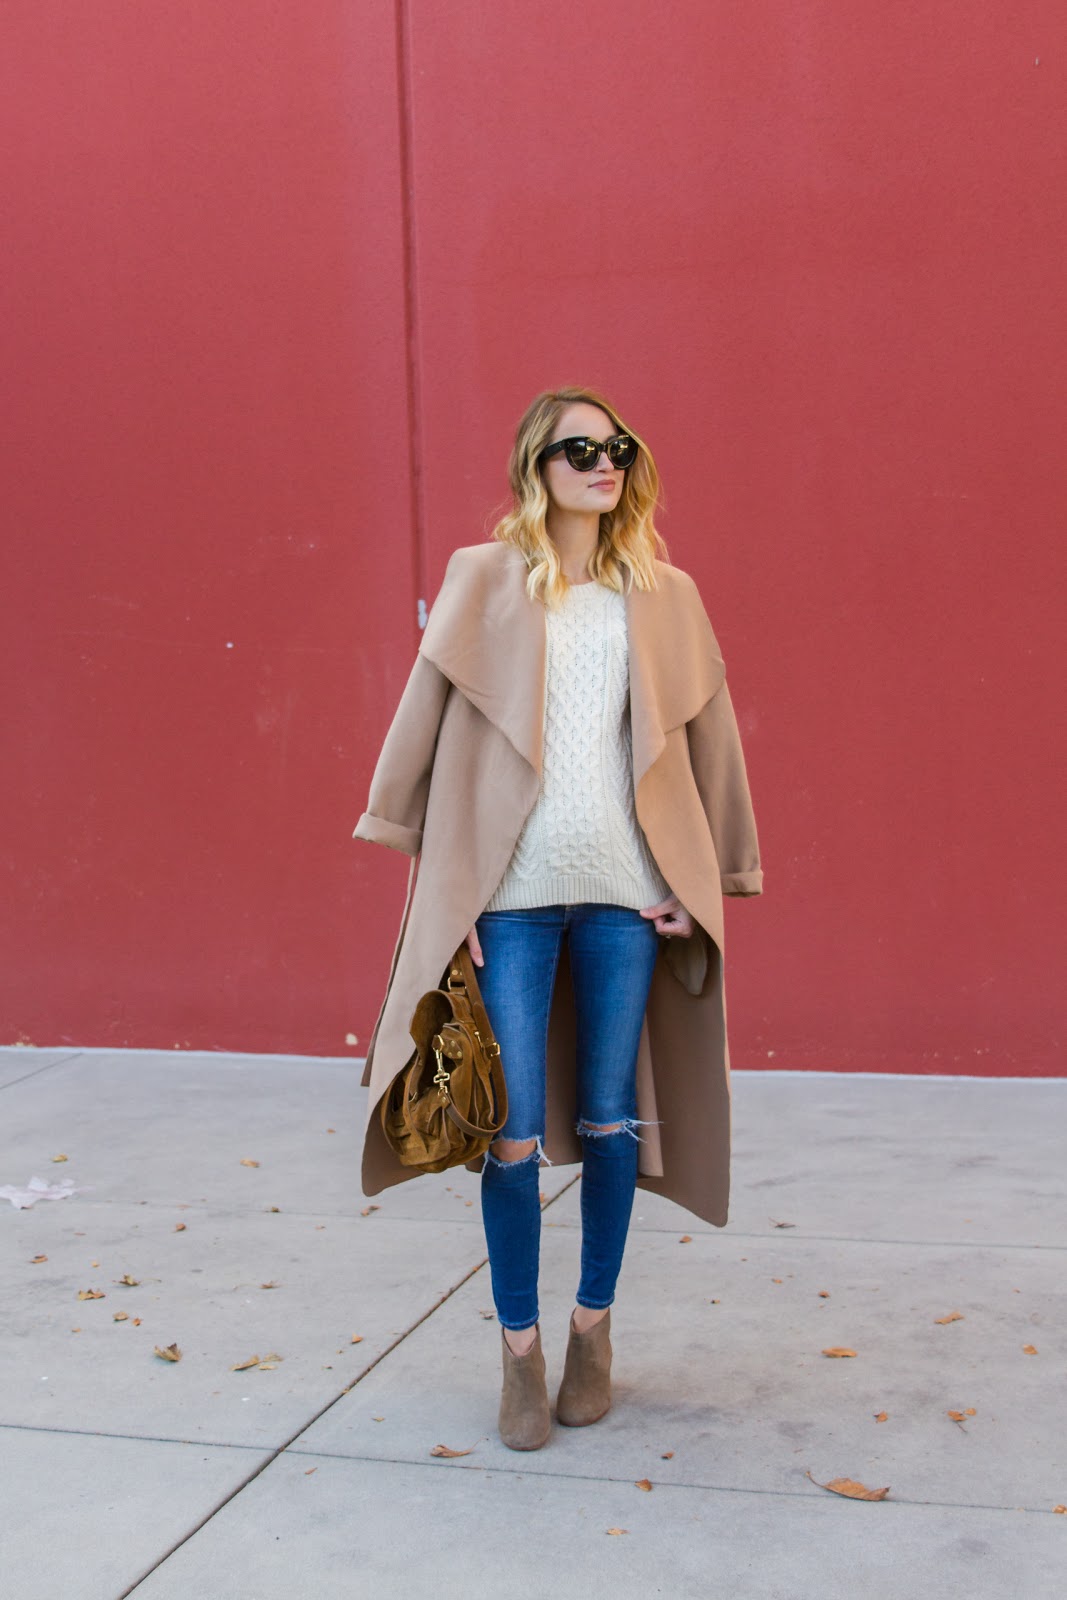 Weekend Cable knit | Little Blonde Book A Fashion Blog by Taylor Morgan